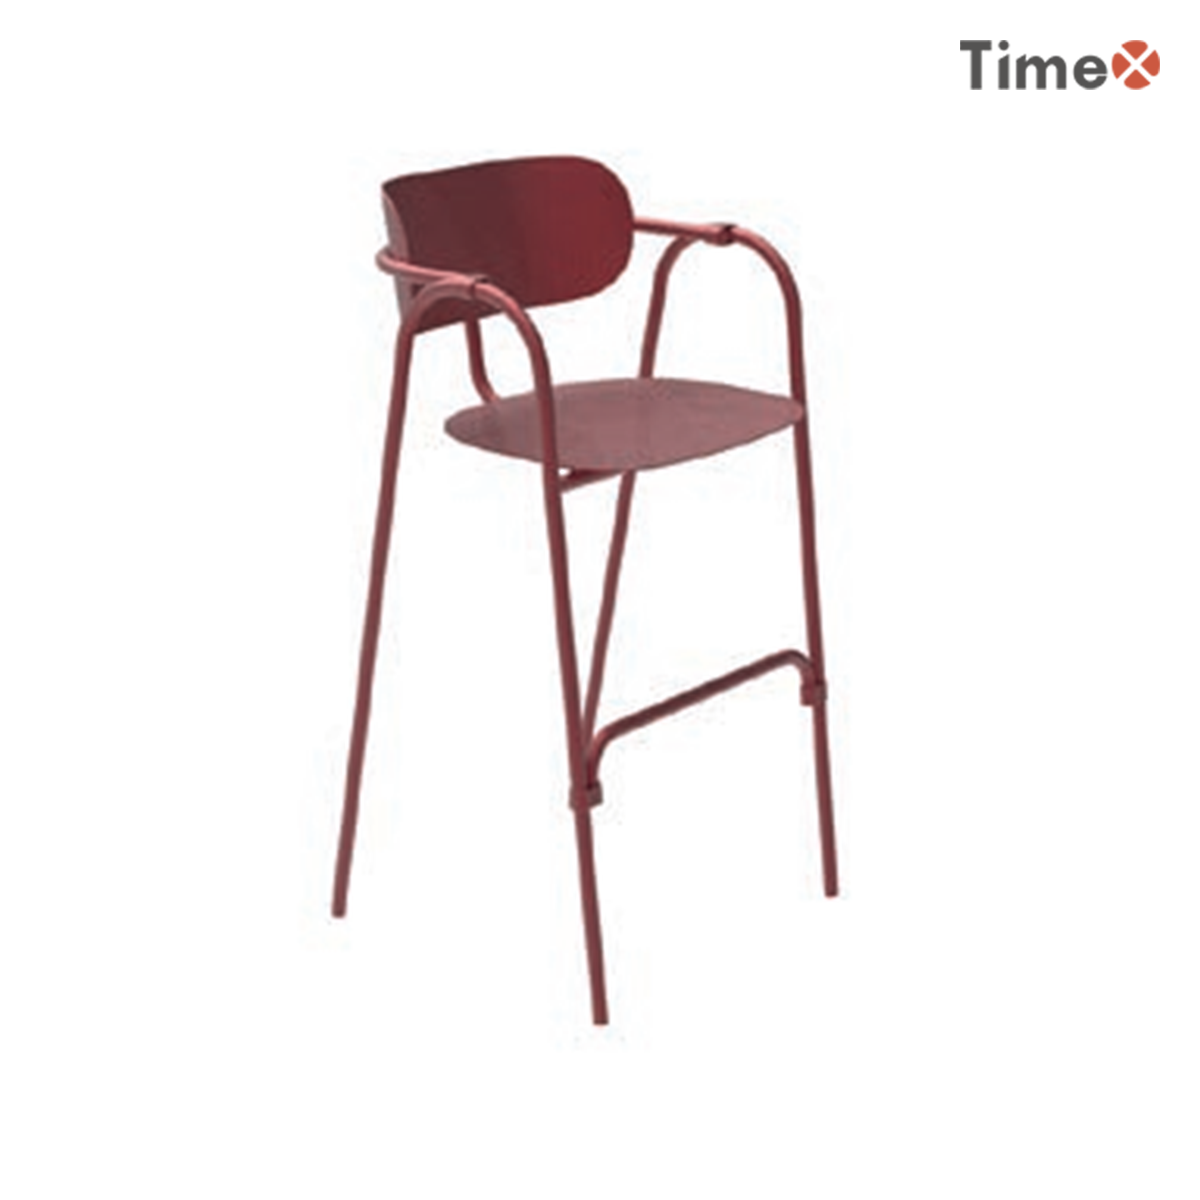 The red design metal chair wholesale.